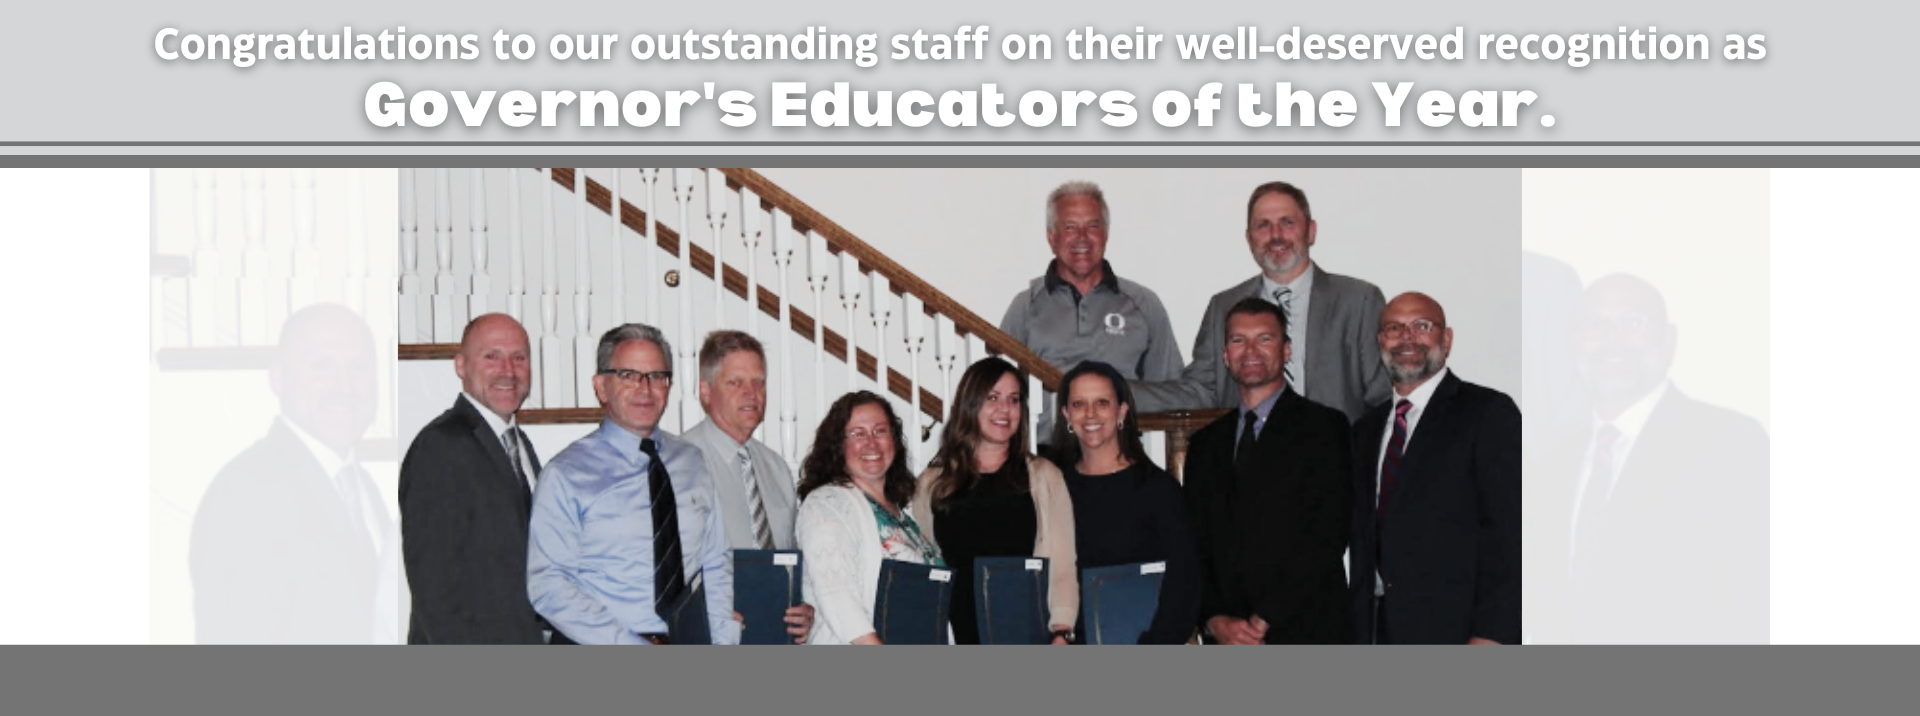 Congratulations to our outstanding staff on their well-deserved recognition as Governor's Educators of the Year.